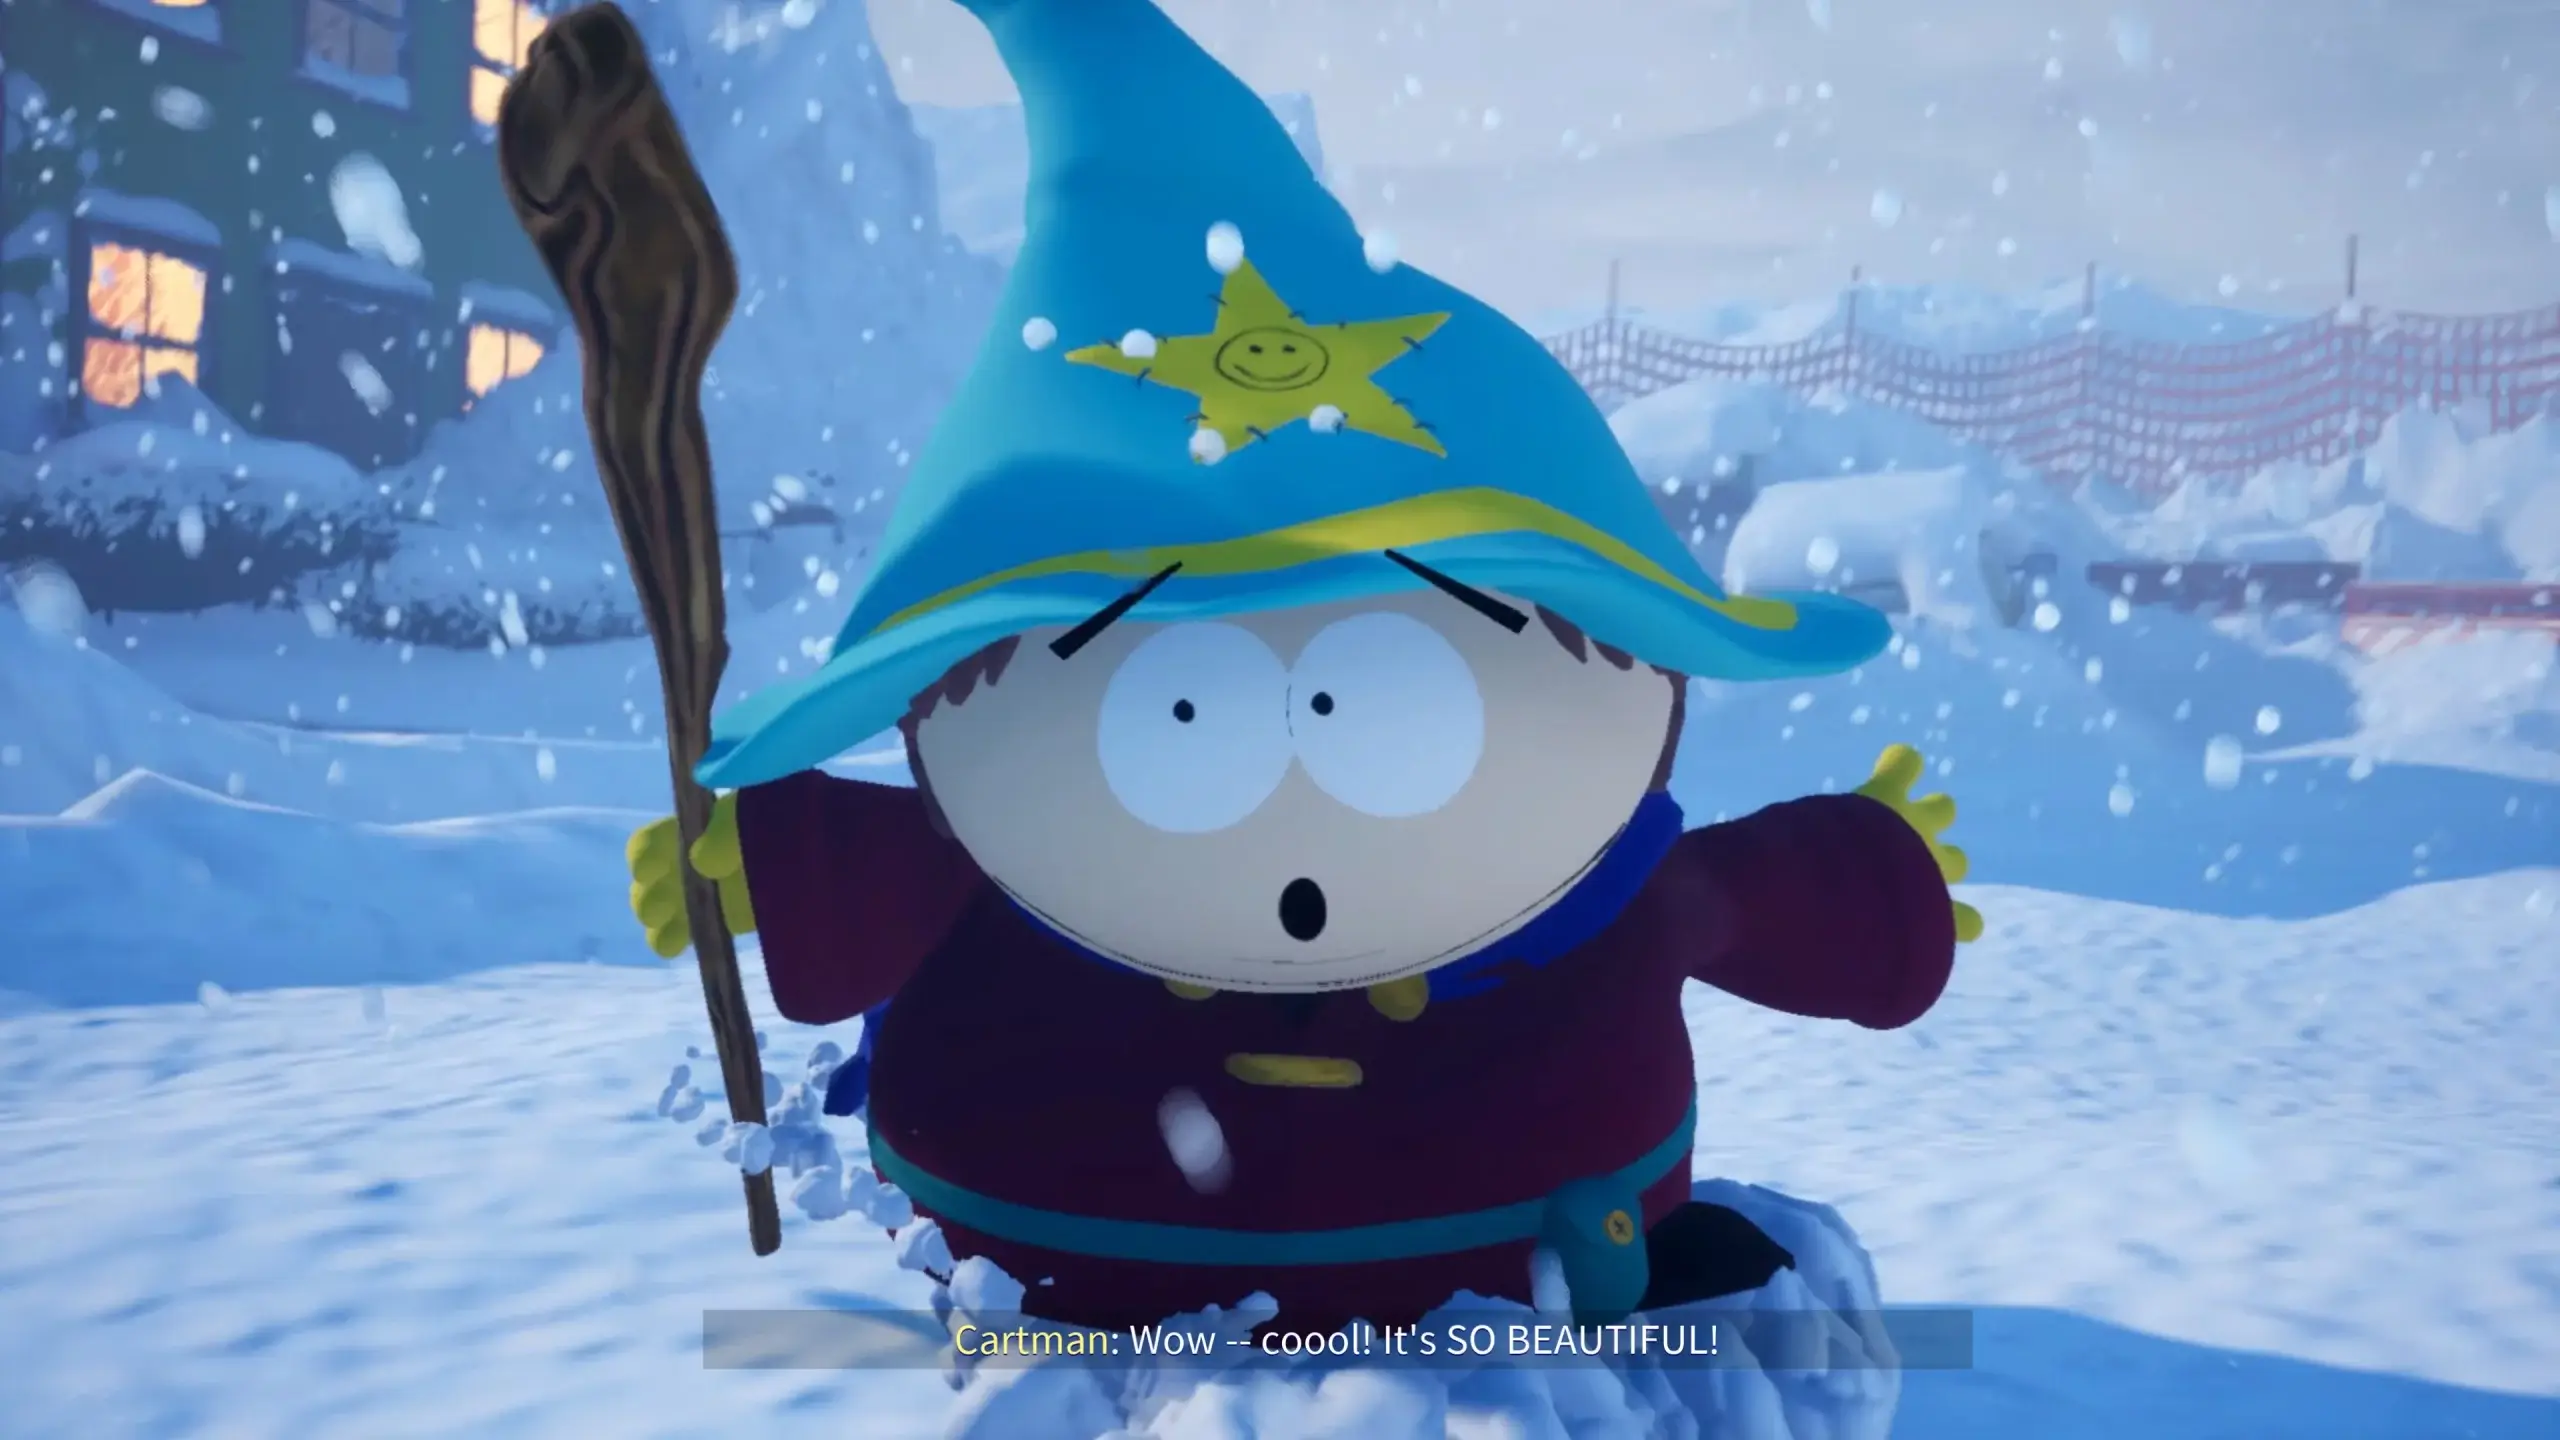 Cartmen now in his outfit from the first game and earlier episodes. The subtitles below are him expressing his joy for the snow day.